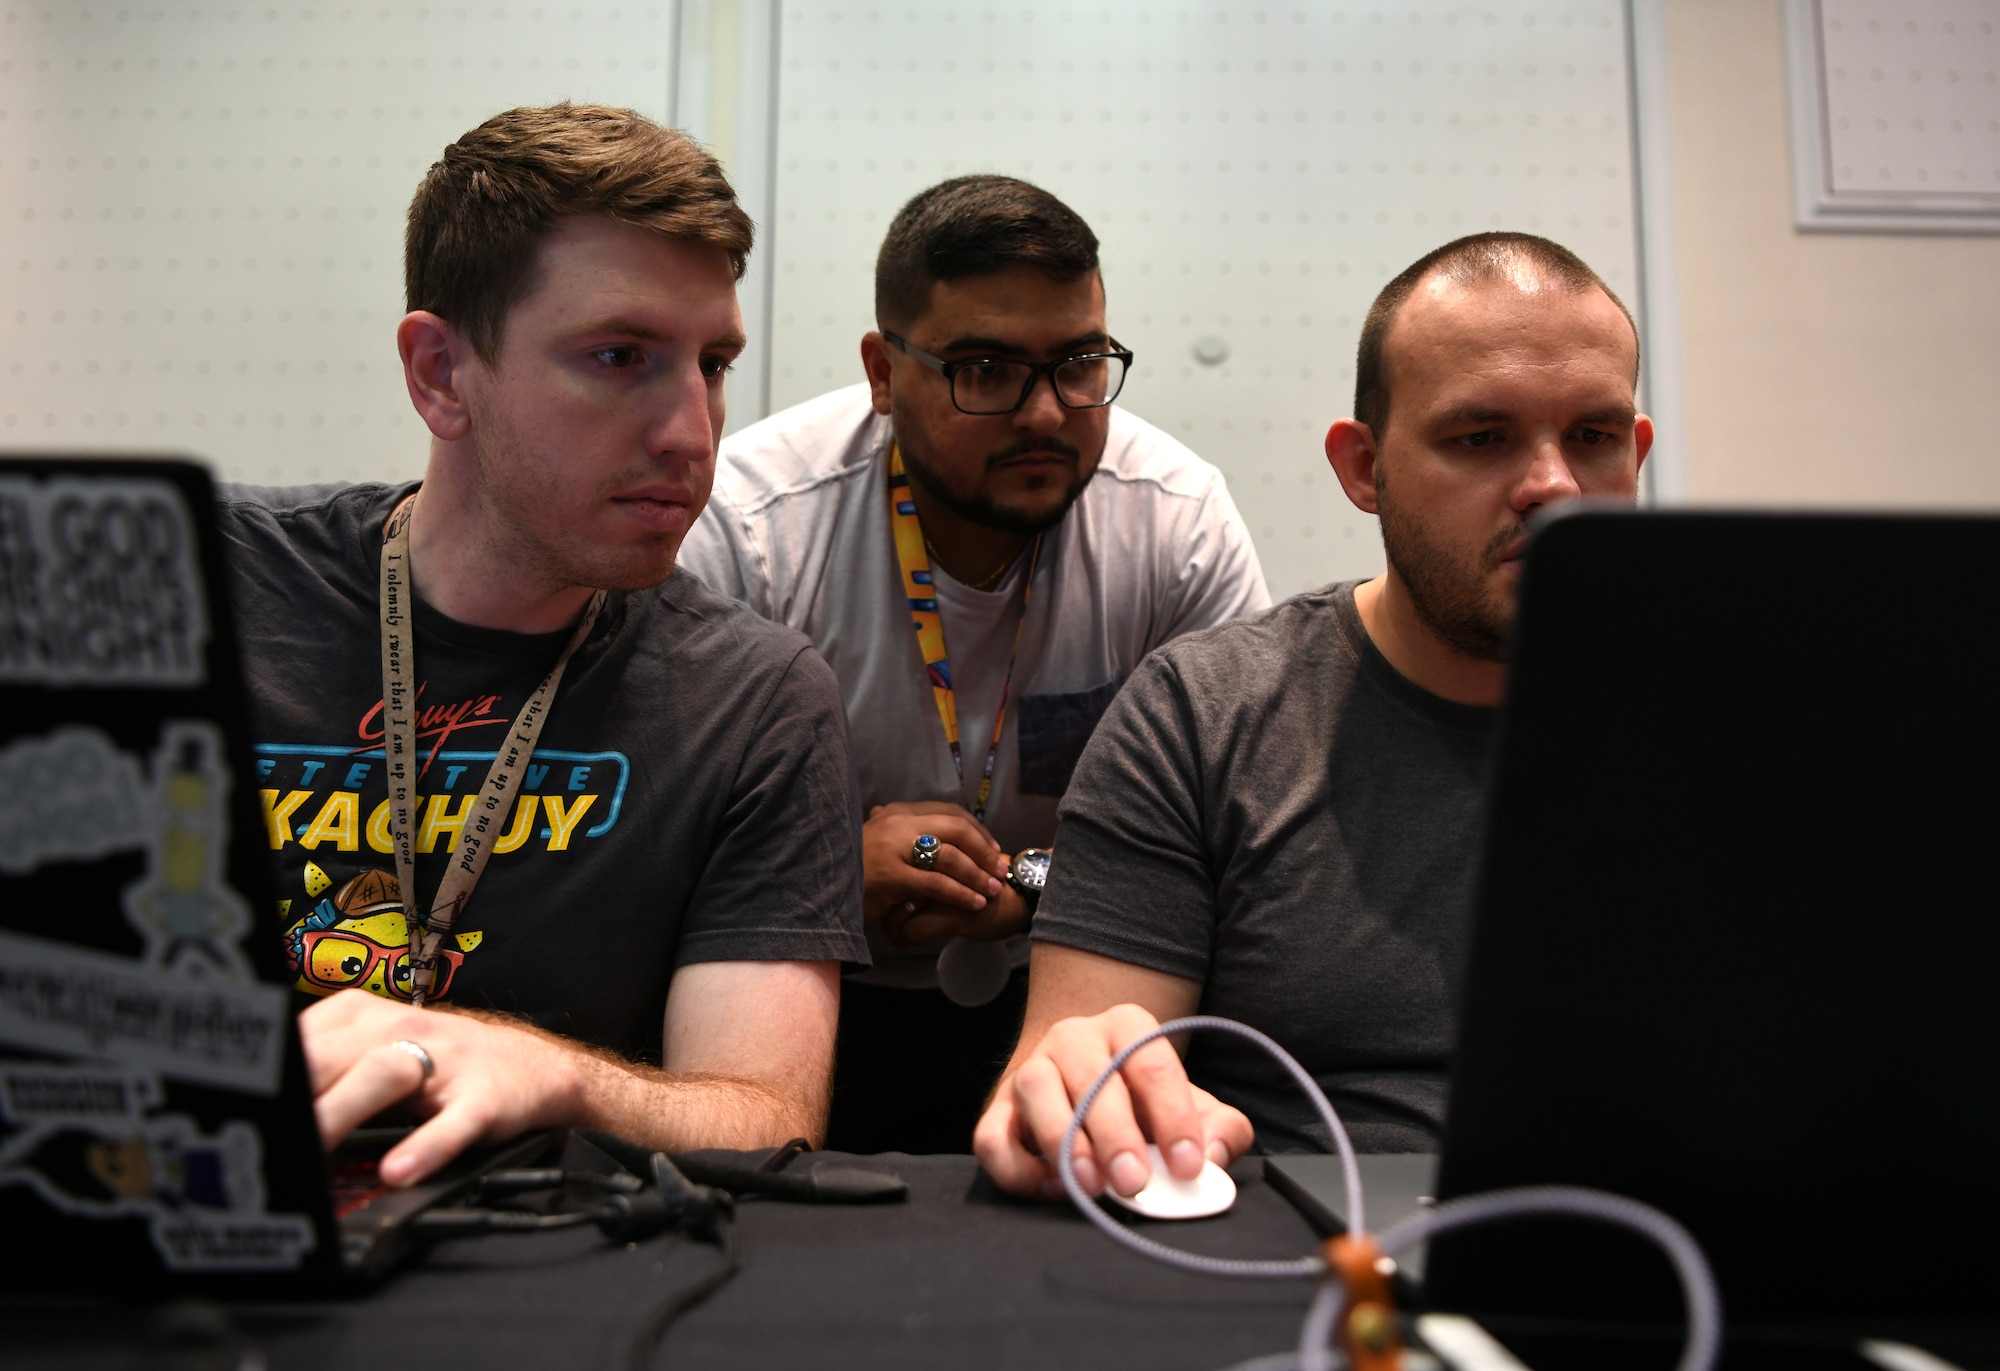 Air Force cyber warfare operators set up their computer stations before a capture-the-flag competition during DEF CON 27 Hacking Conference in Las Vegas, Aug. 8, 2019. The operators participated in a number of DEF CON events to showcase their knowledge and experience. (U.S. Air Force photo by Tech. Sgt. R.J. Biermann)